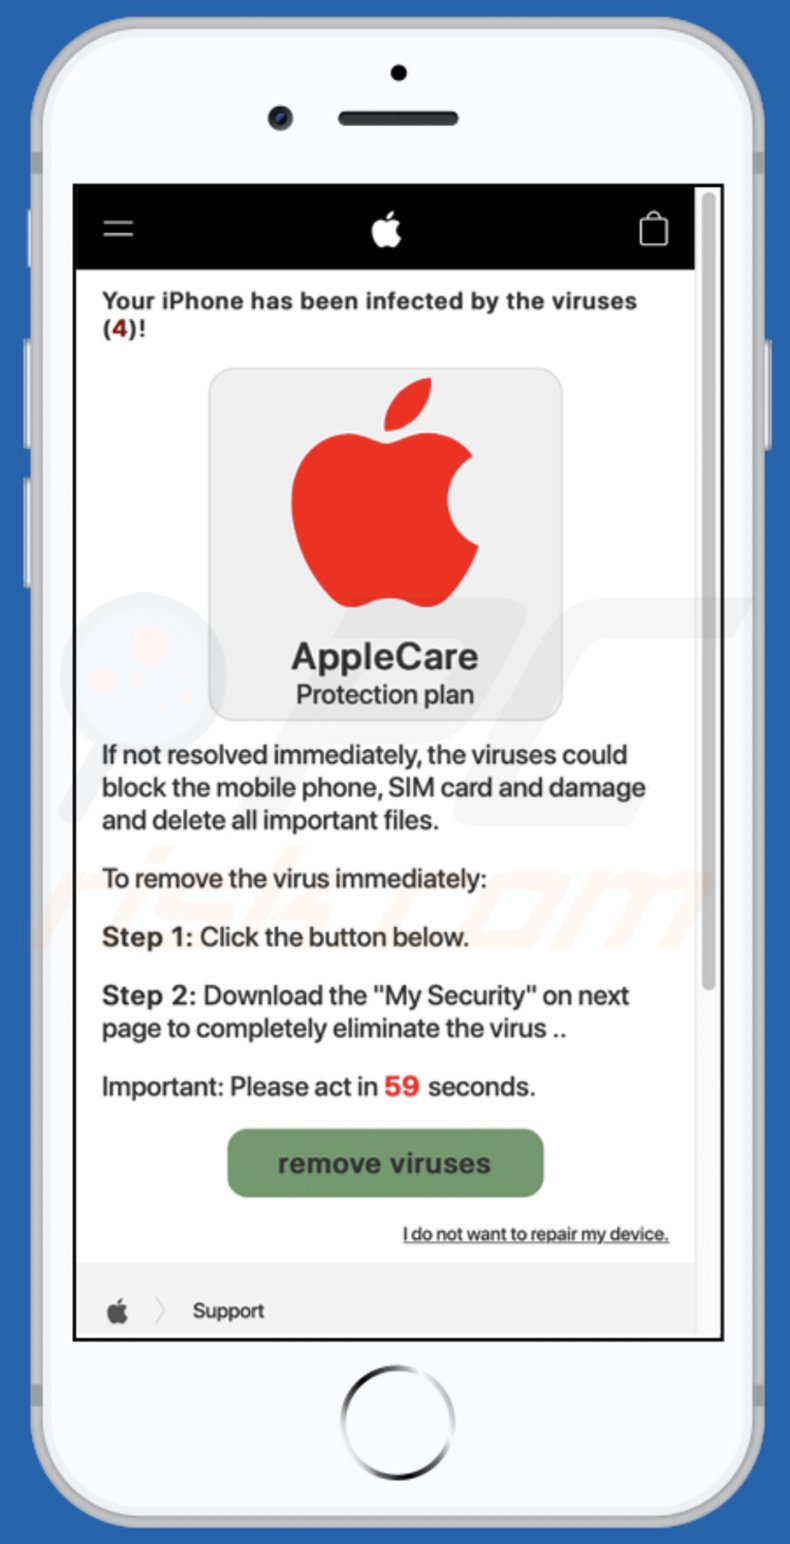 Mobile variant of AppleCare Protection Plan pop-up scam delivered by securitycheck.network